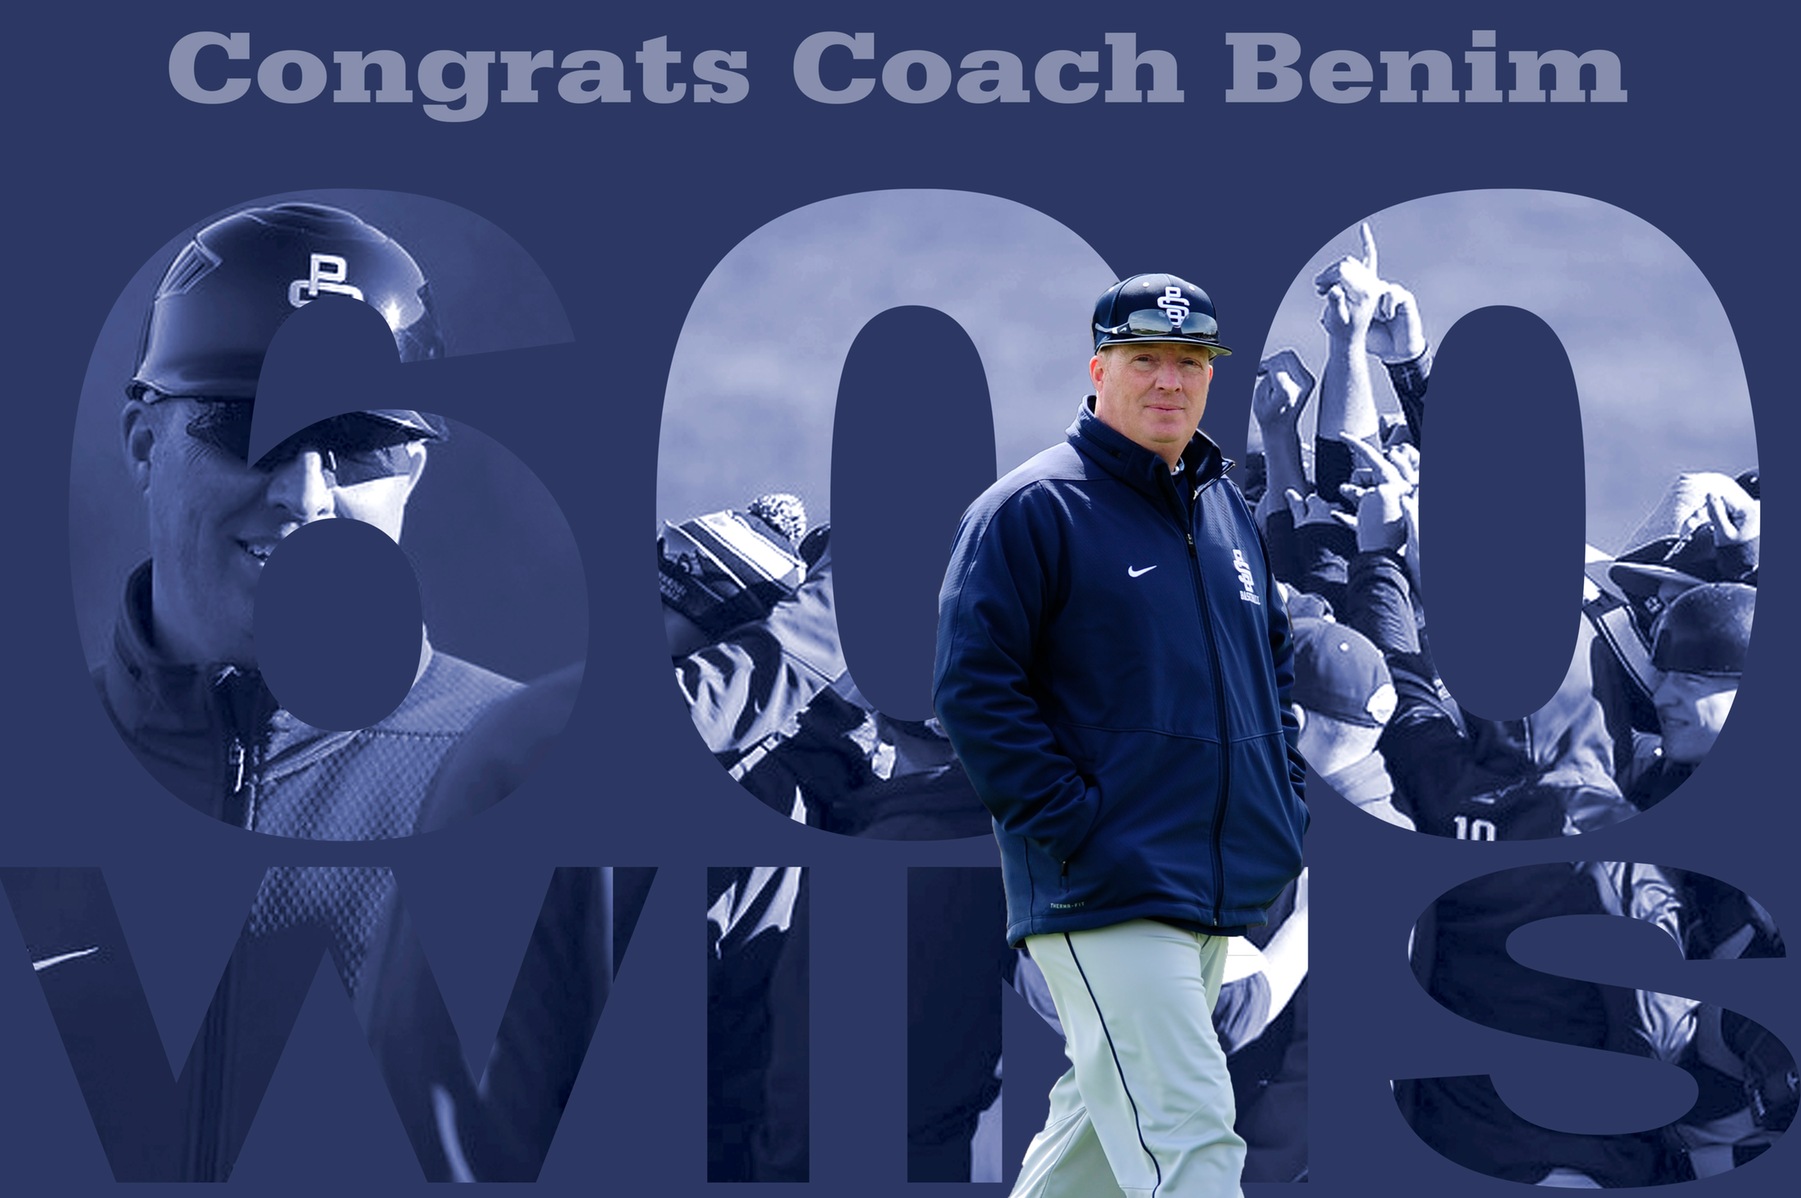 Benim Reaches Career Victory 600 in Split with Greensburg